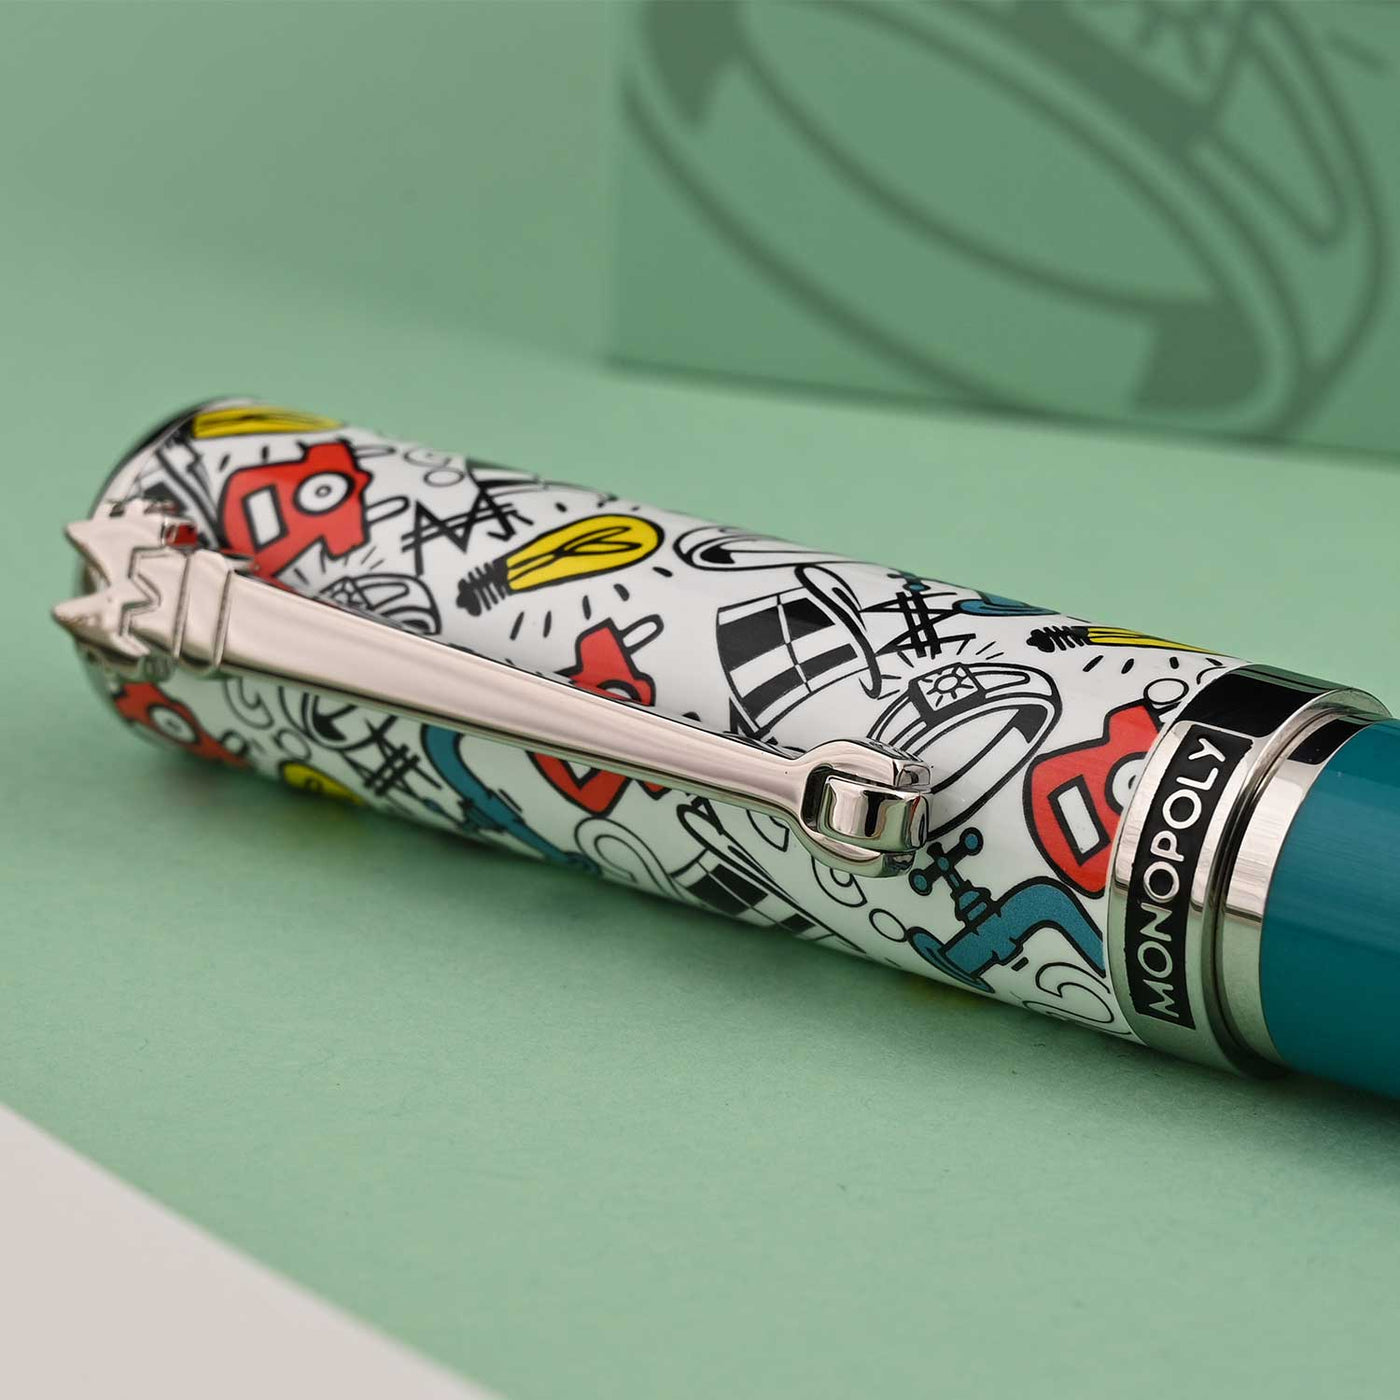 Montegrappa Monopoly Players Roller Ball Pen - Genius 9